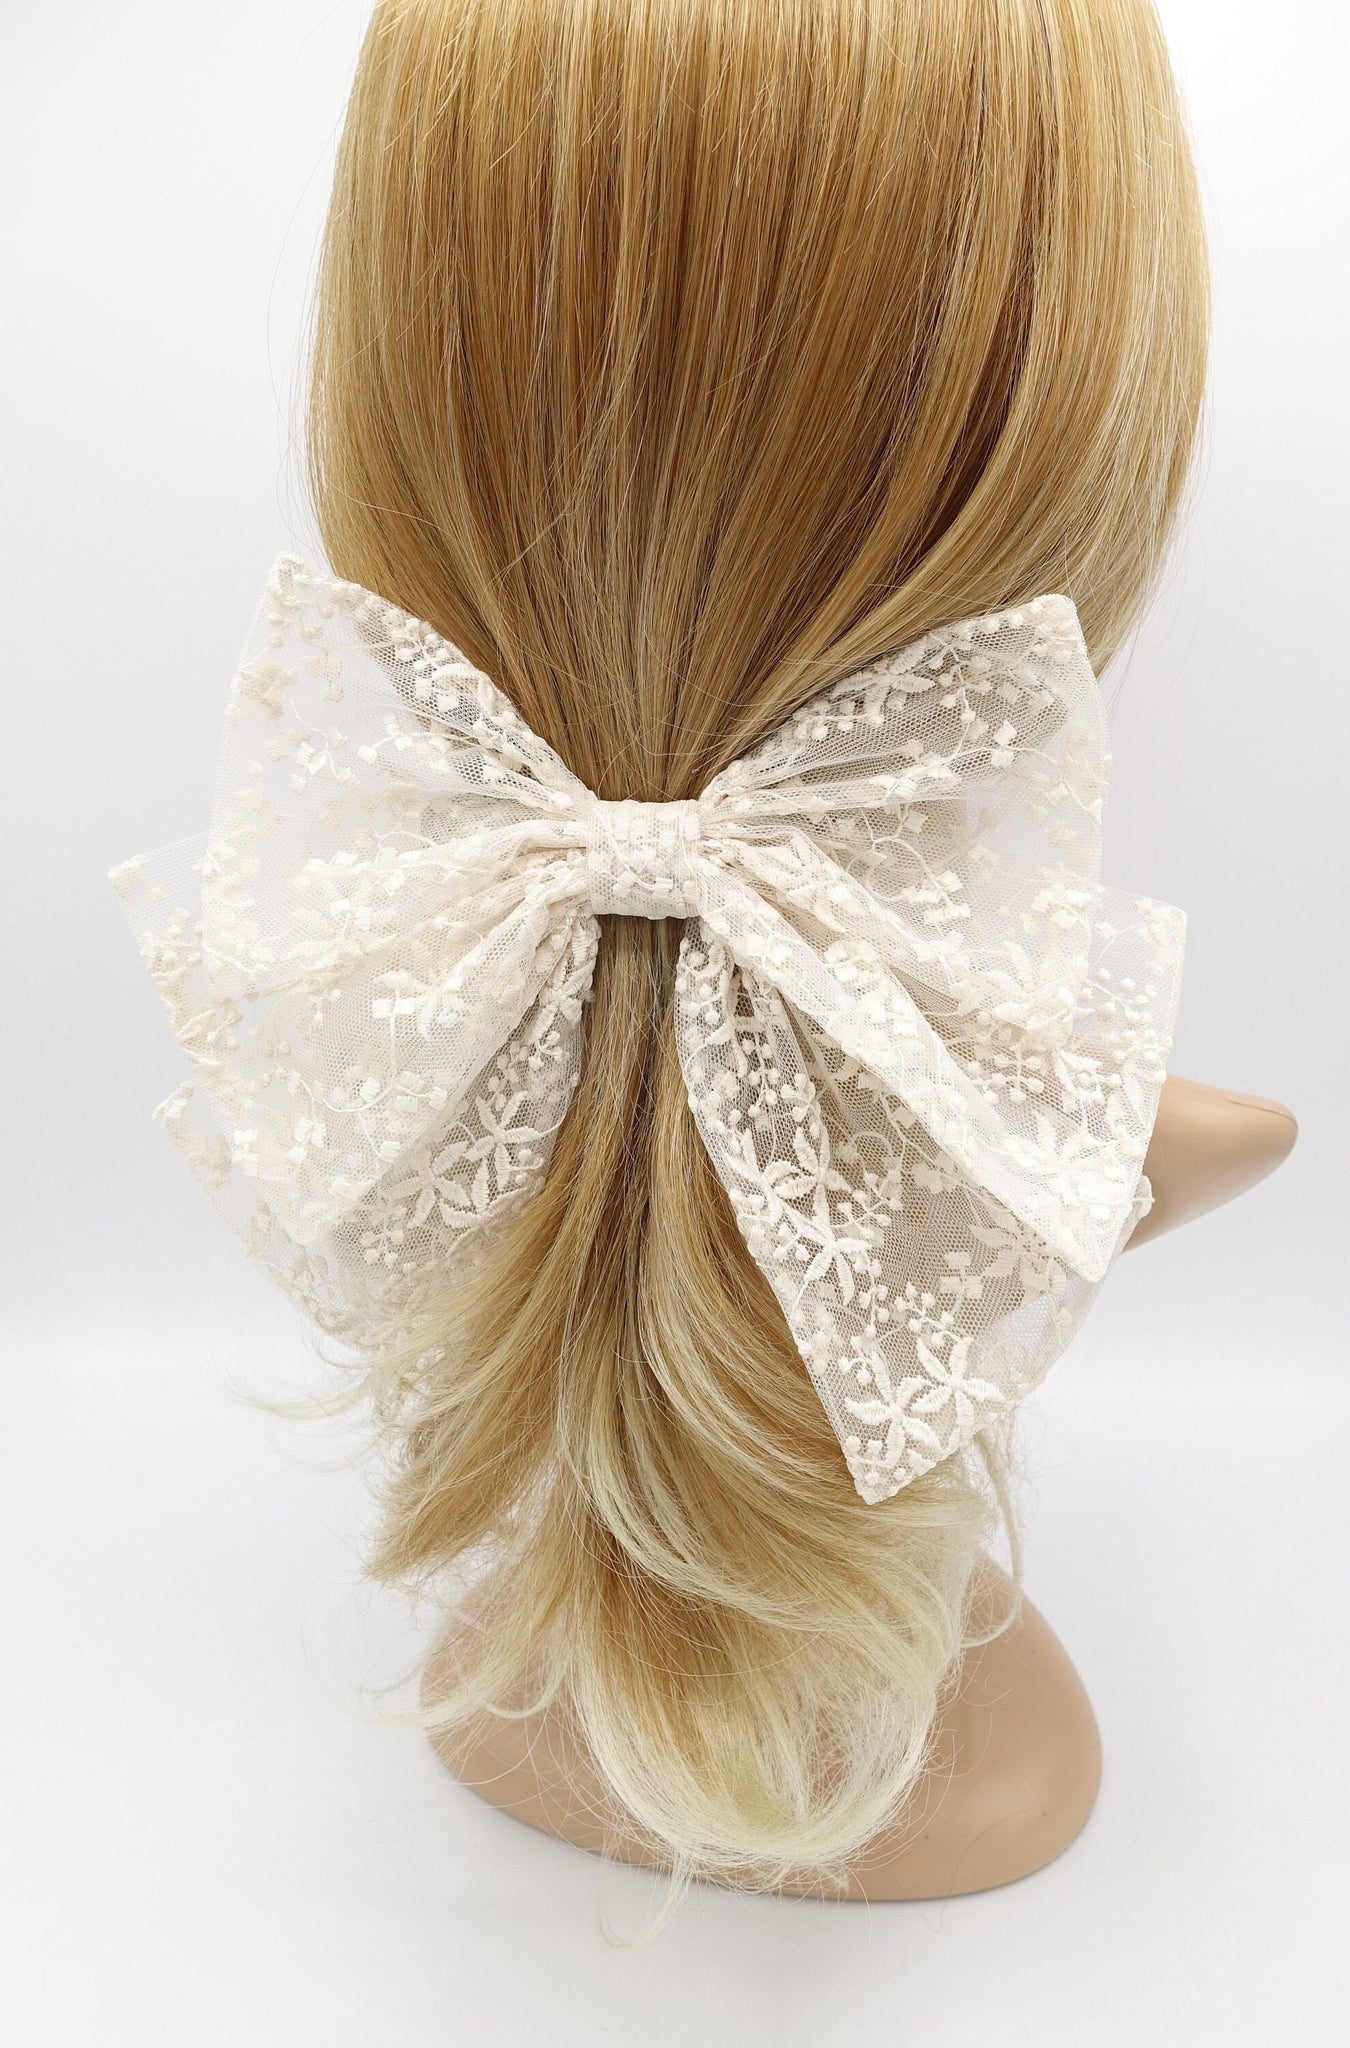 VeryShine Hair Accessories Cream white floral lace hair bow layered hair accessory for women